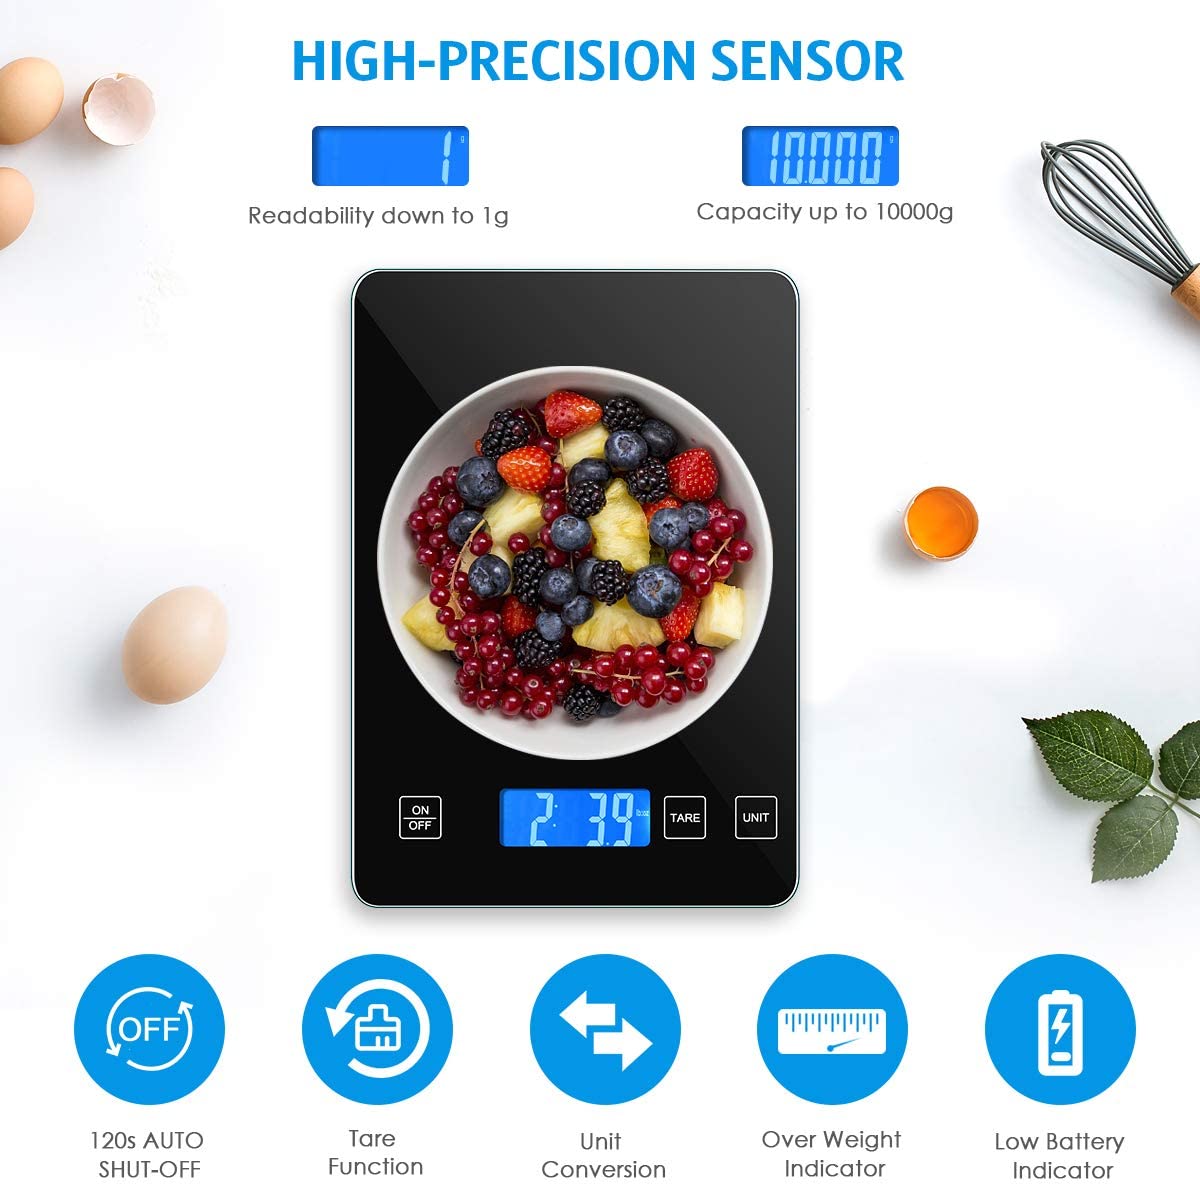 Digital Kitchen Scale 1g-10kg Food Scale Waterproof Tempered Glass Platform High Accuracy Multi-Function Scale